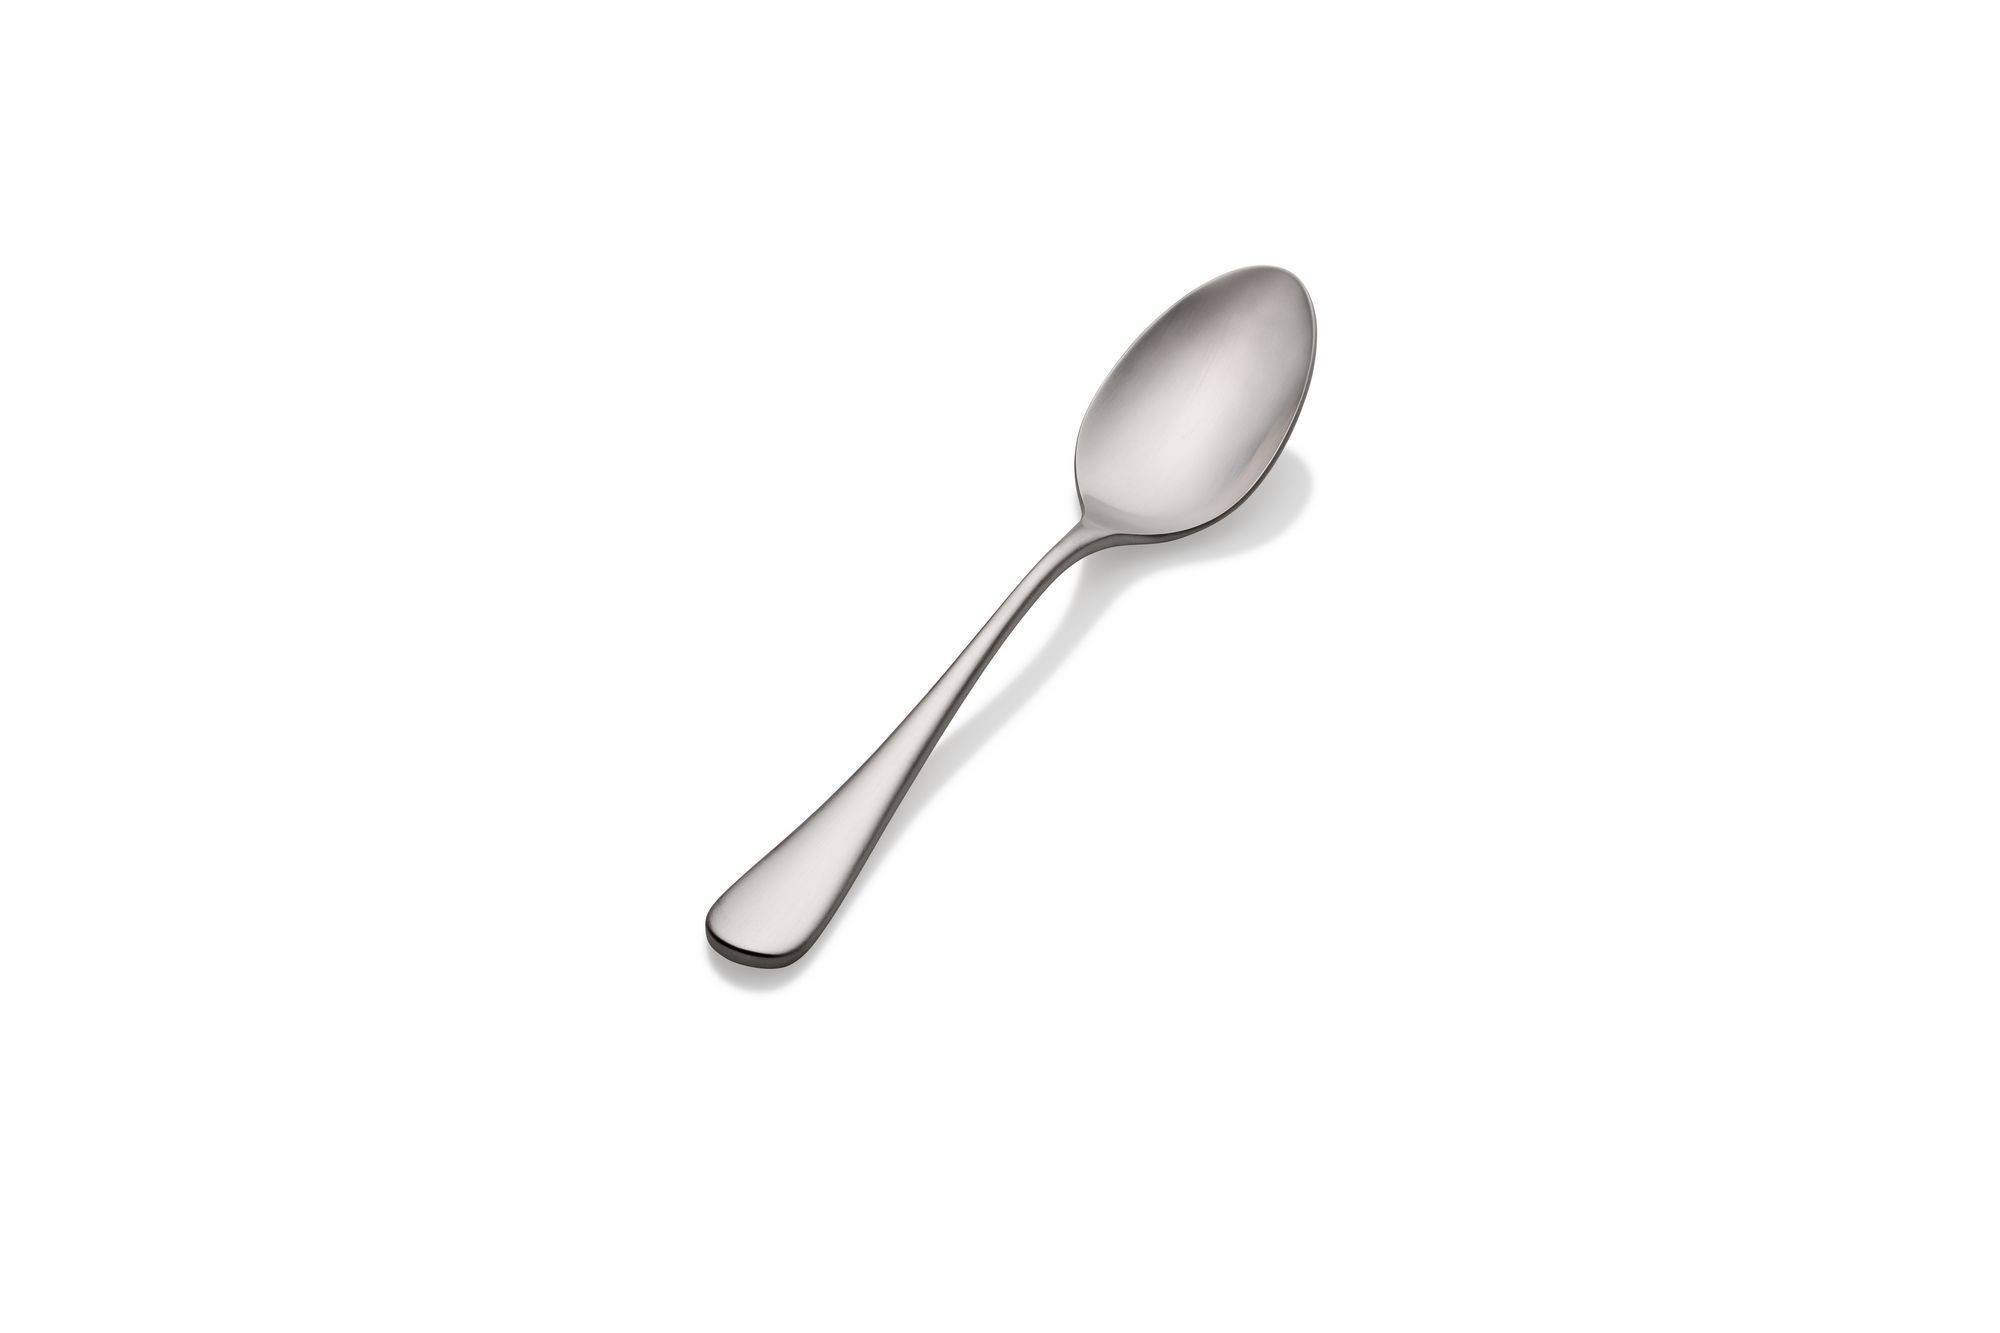 Bon Chef S4103 Como Satin Finish 18/8 Stainless Steel Soup and Dessert Spoon